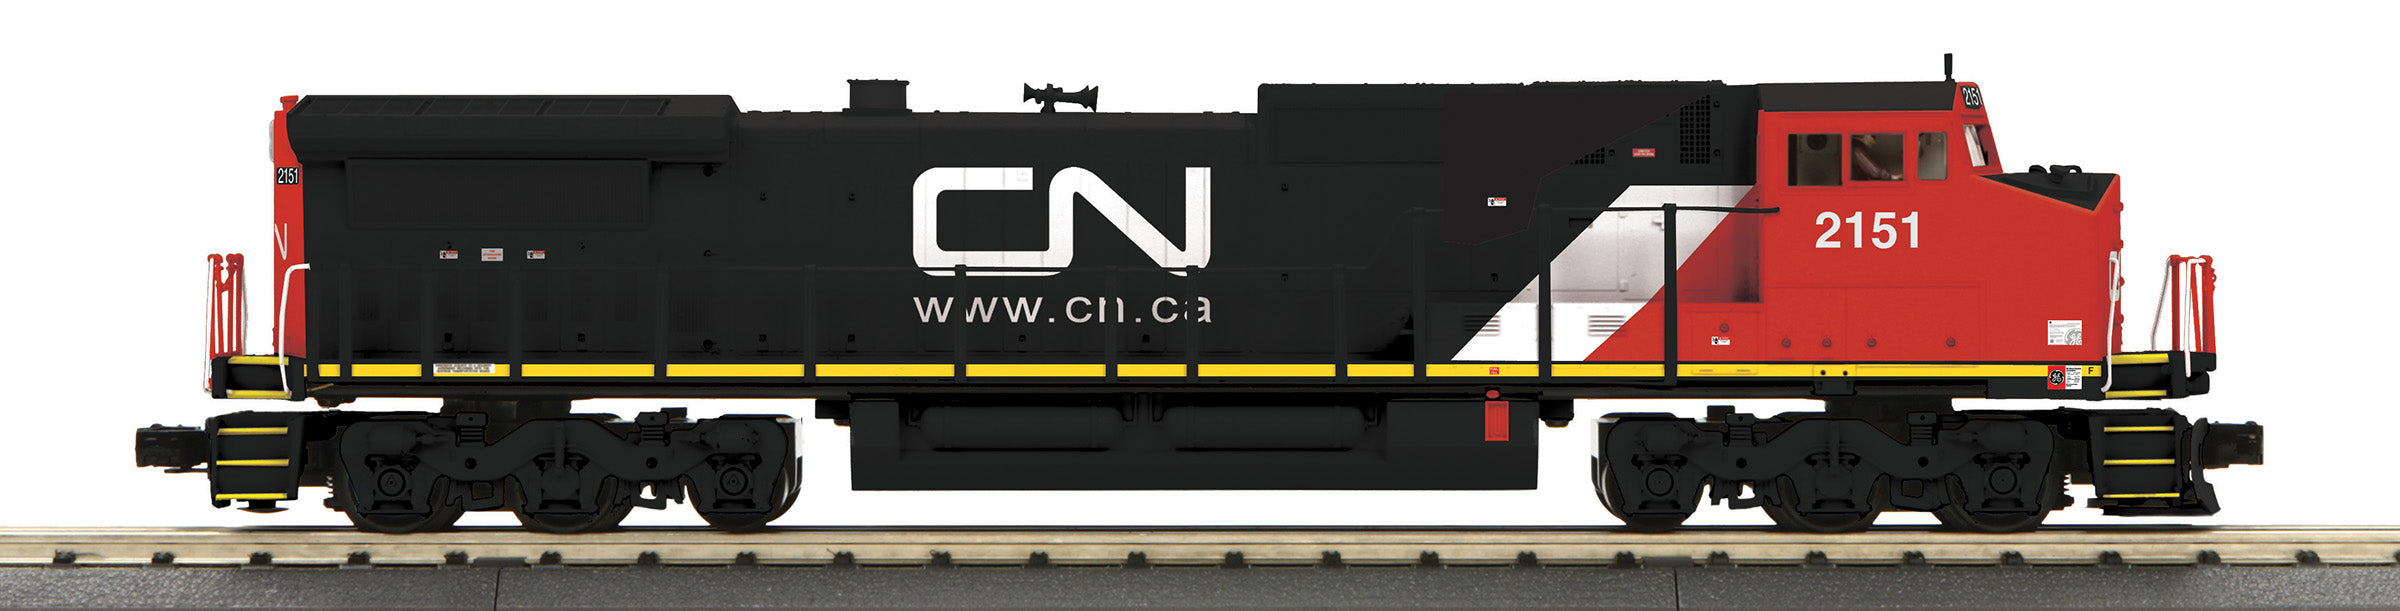 MTH 30-21087-1 - Dash-8 Diesel Engine "Canadian National" #2151 w/ PS3